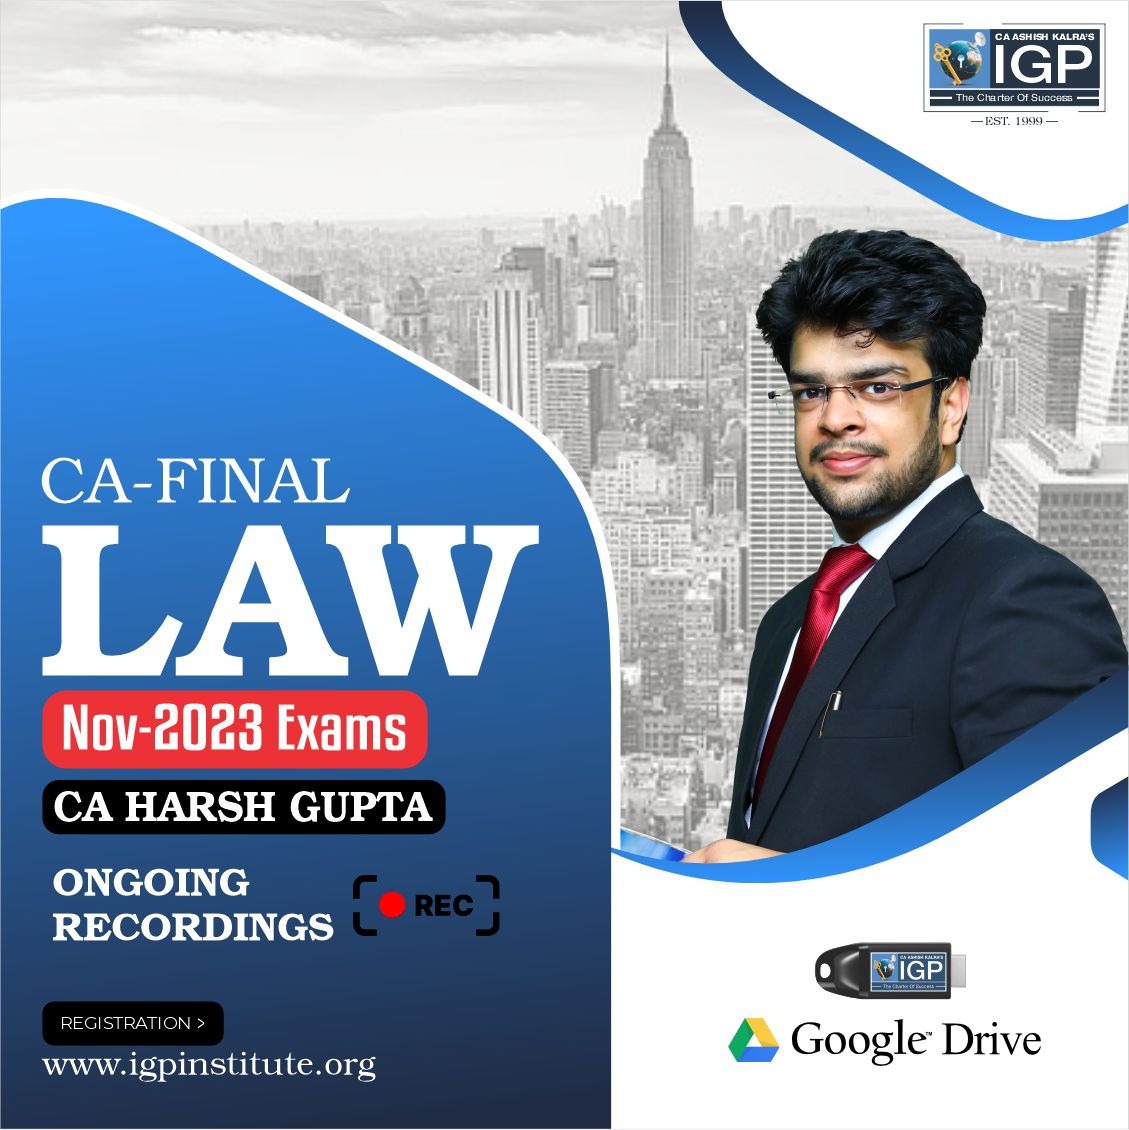 CA Final Law For Nov 23 Exam Ongoing Recordings-CA-Final-Law- CA Harsh Gupta